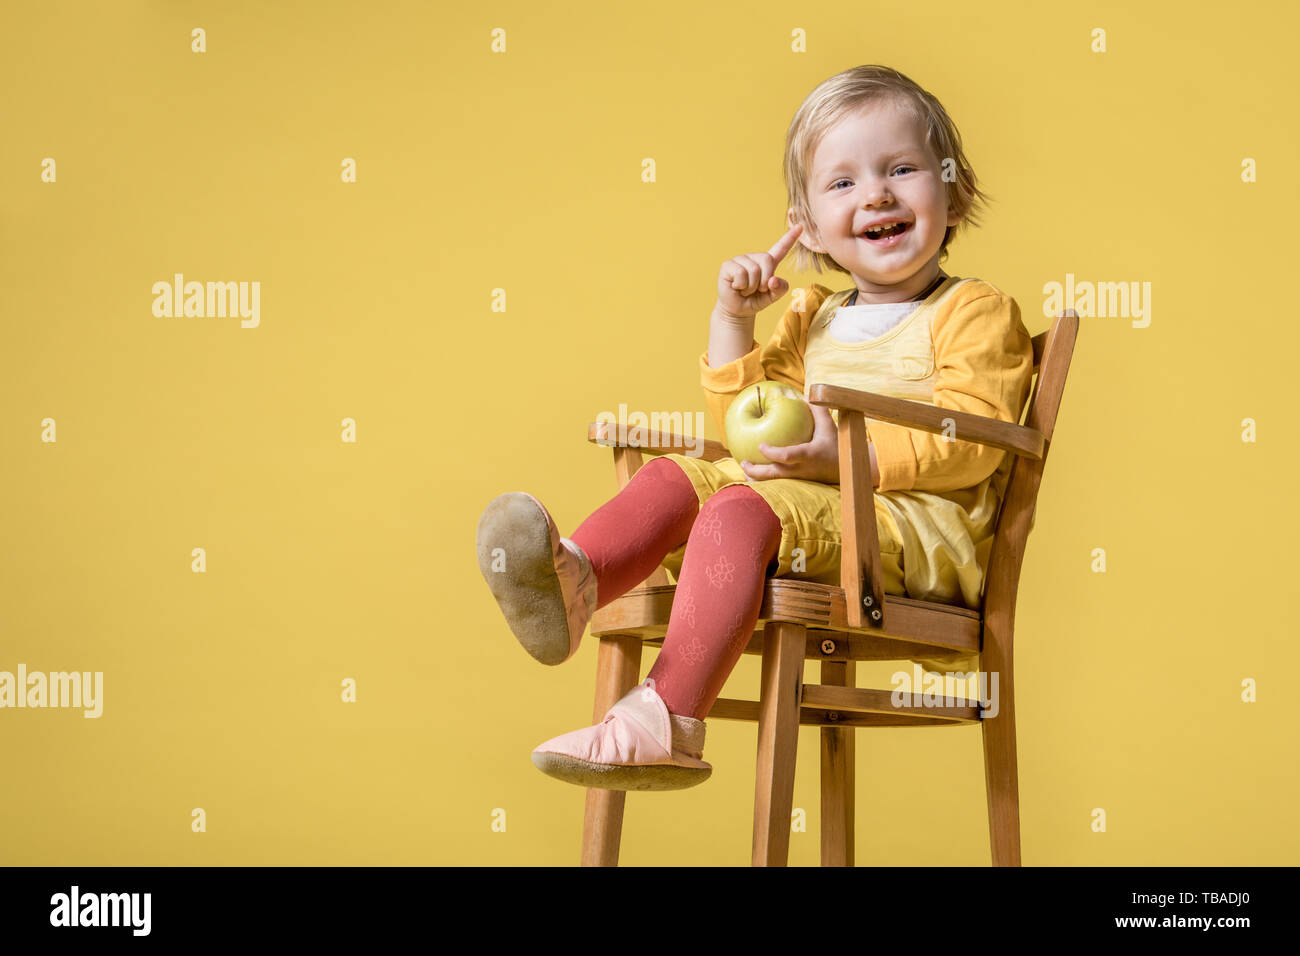 Young Blonde Girl in Yellow Dress, Sitting on Baby Chair and Cheerfully Laughing, Smiling and Eating Green Apple on Yellow Background Stock Photo